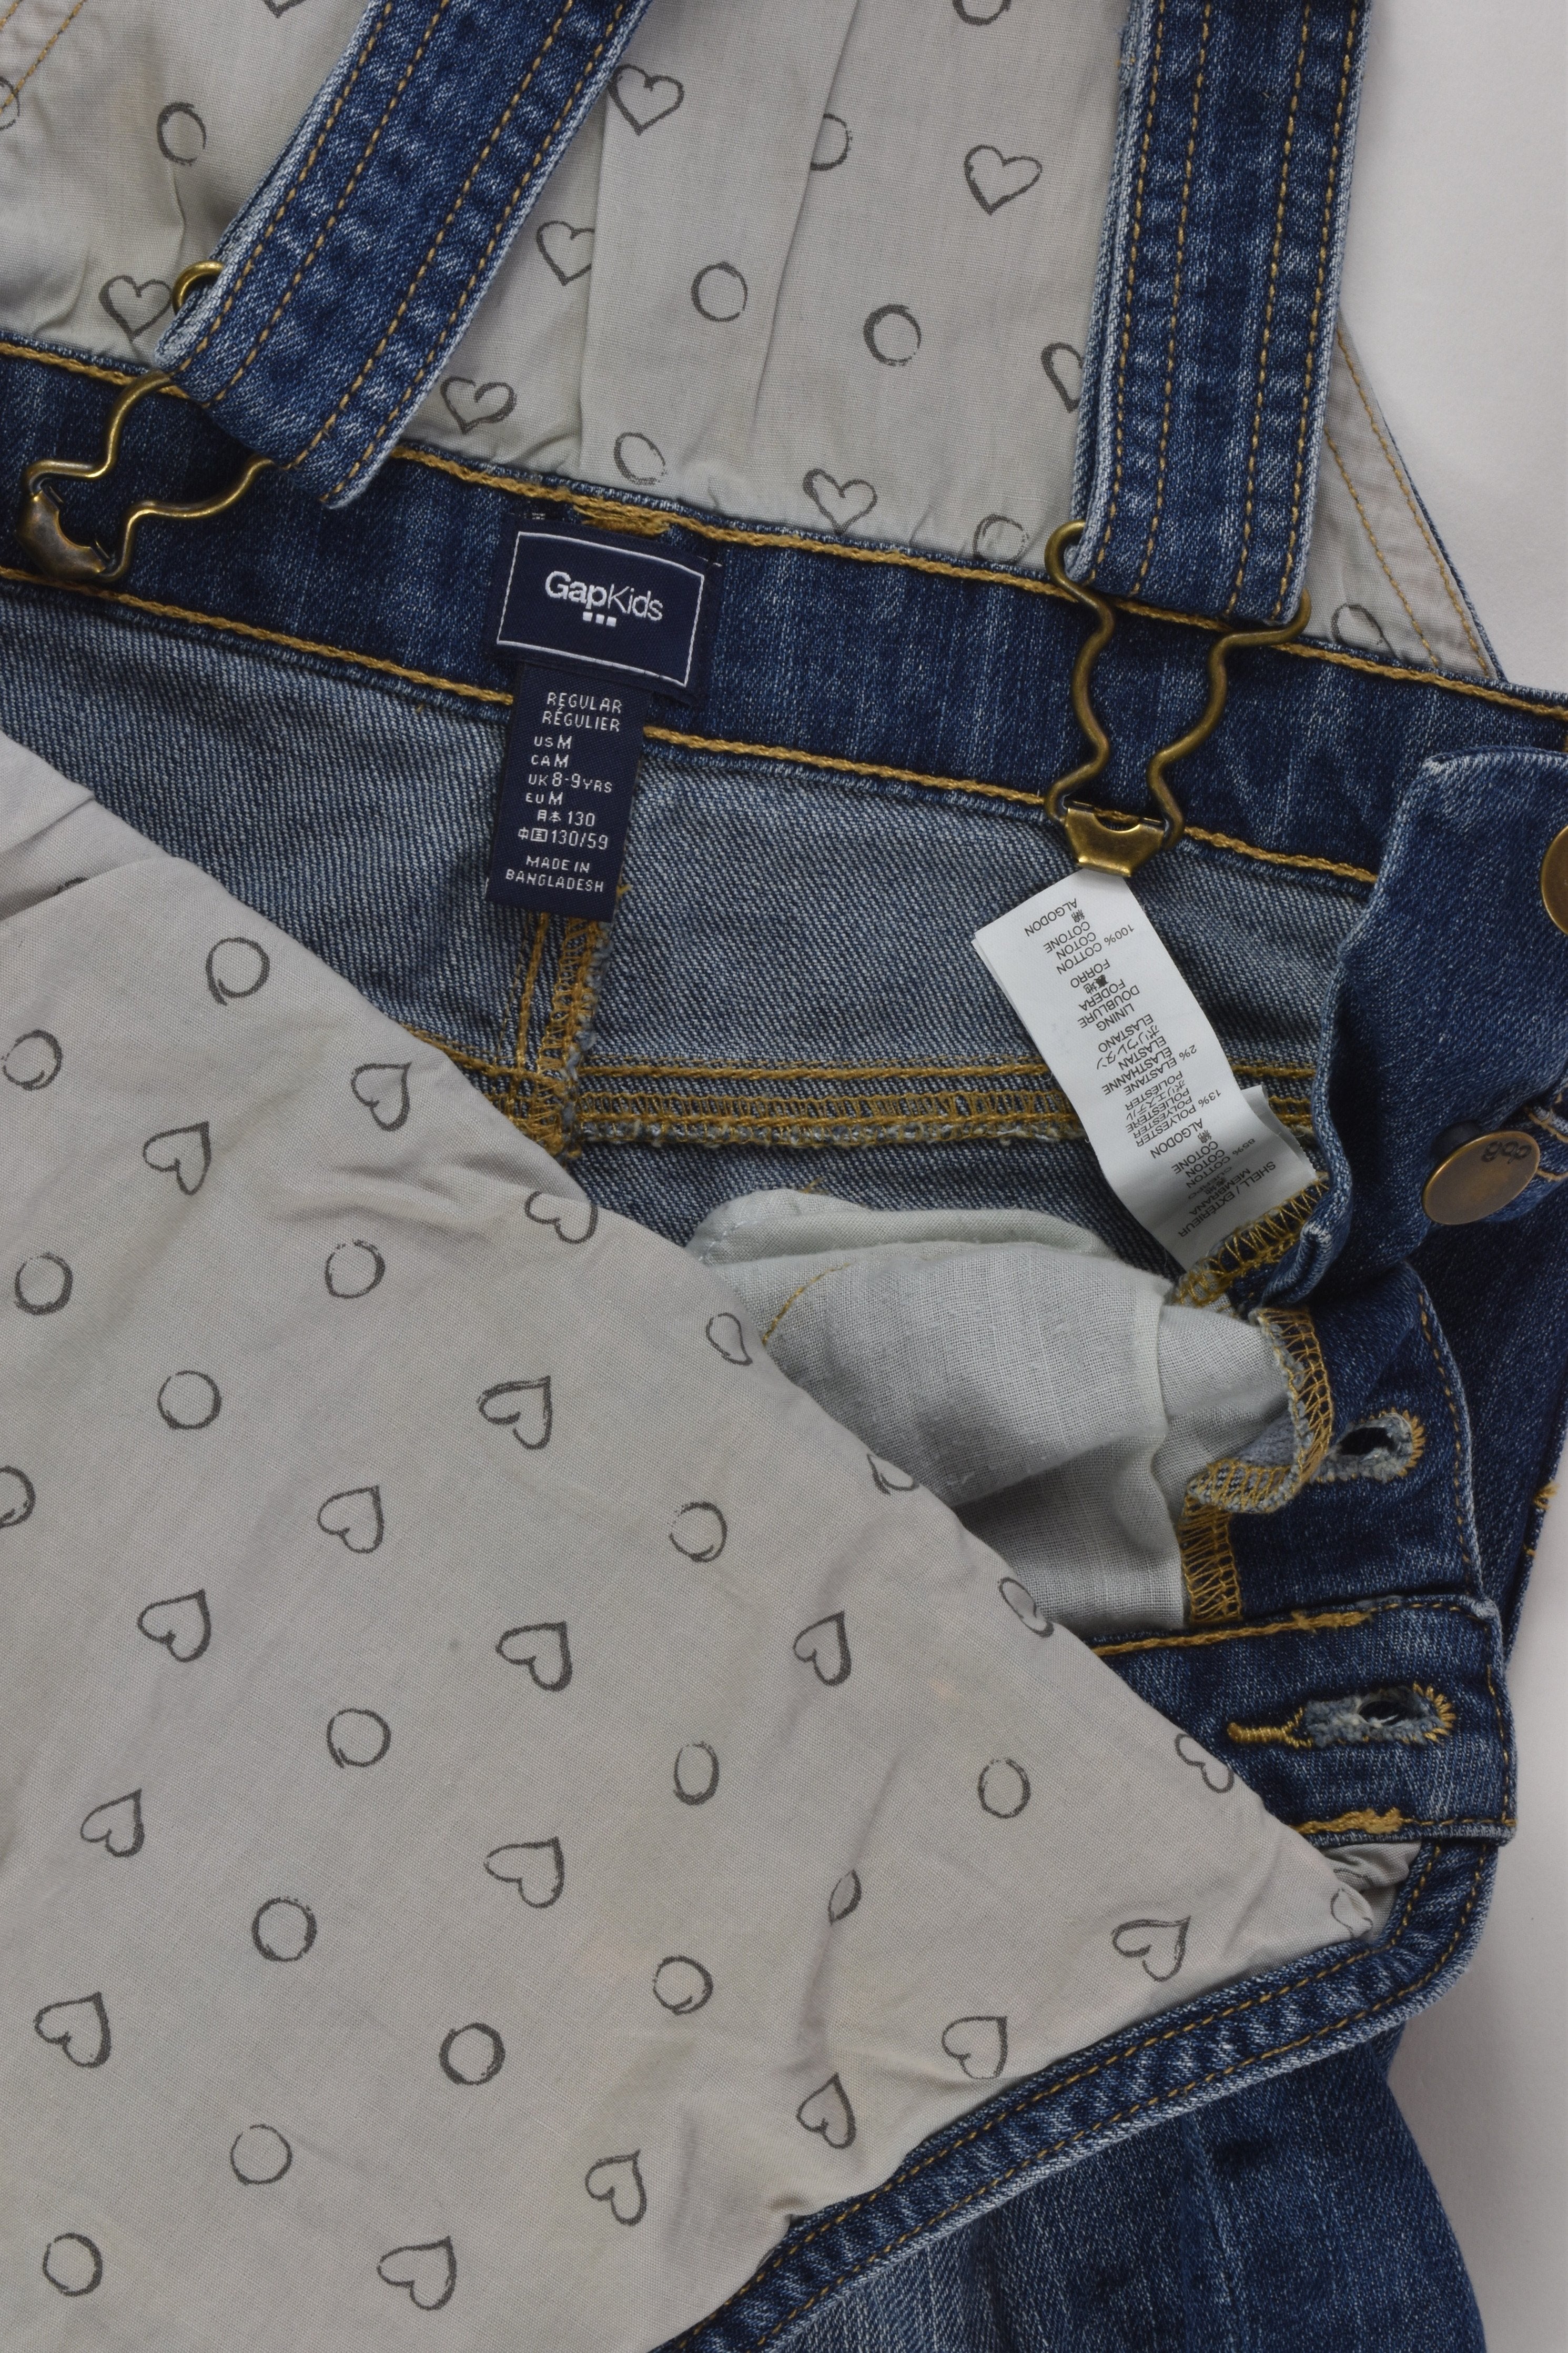 Gap Kids Size 8-9 Short Denim Overalls – MiniMe Preloved Baby and Kids'  Clothes